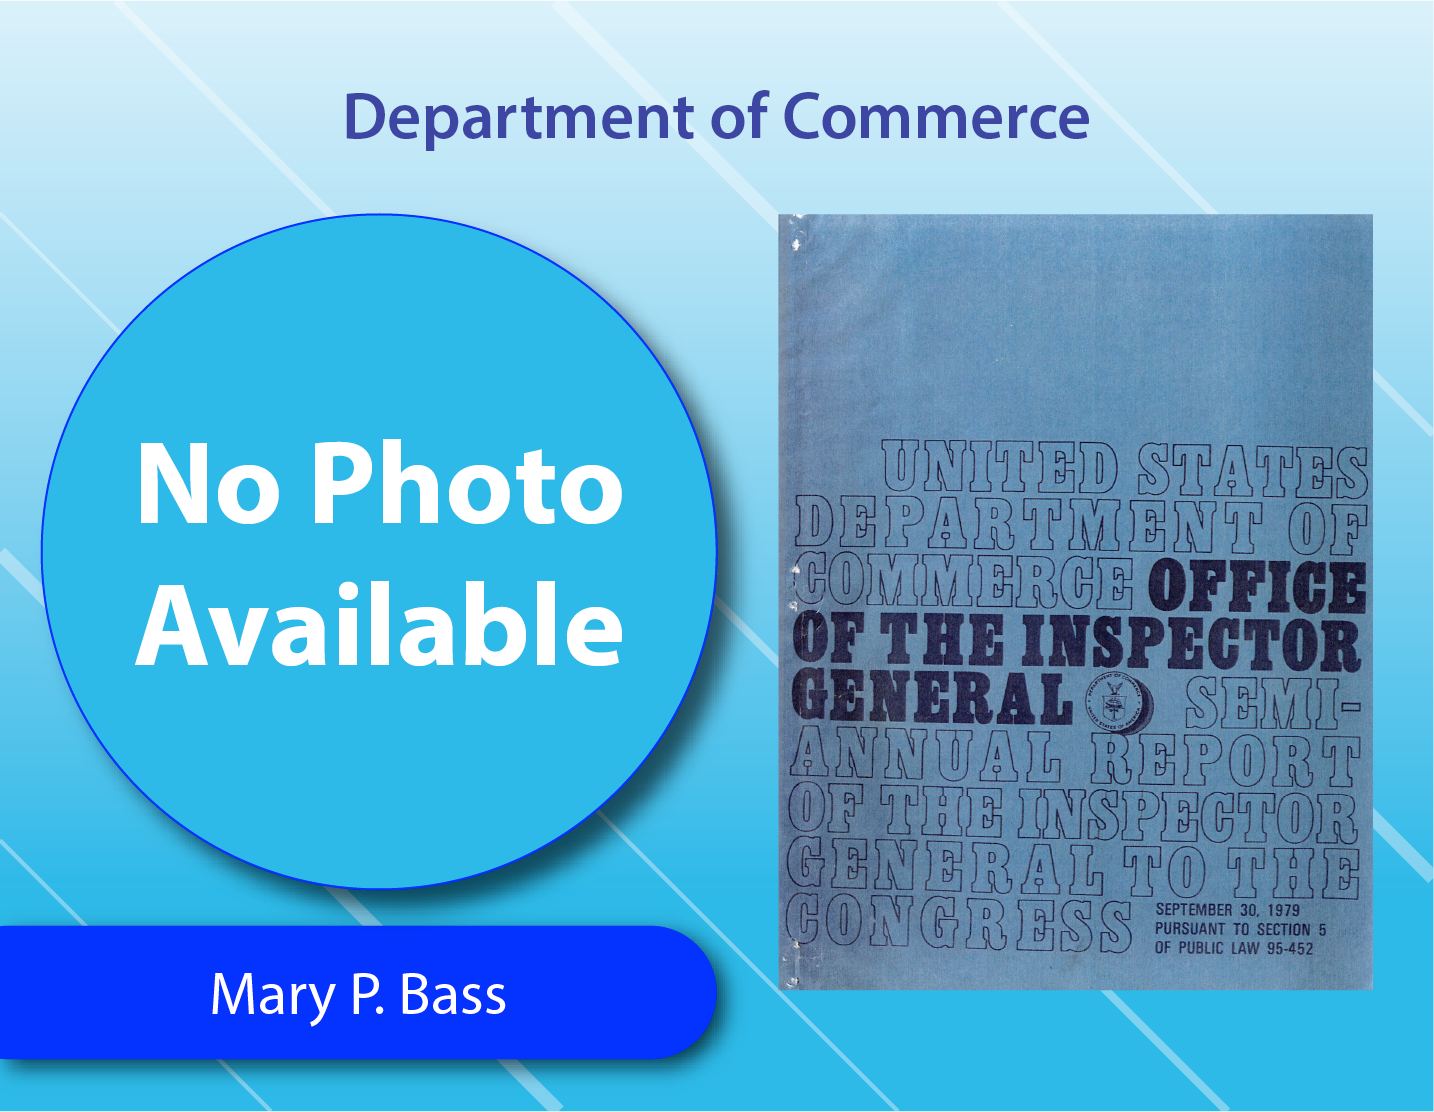 Department of Commerce - Mary P. Bass